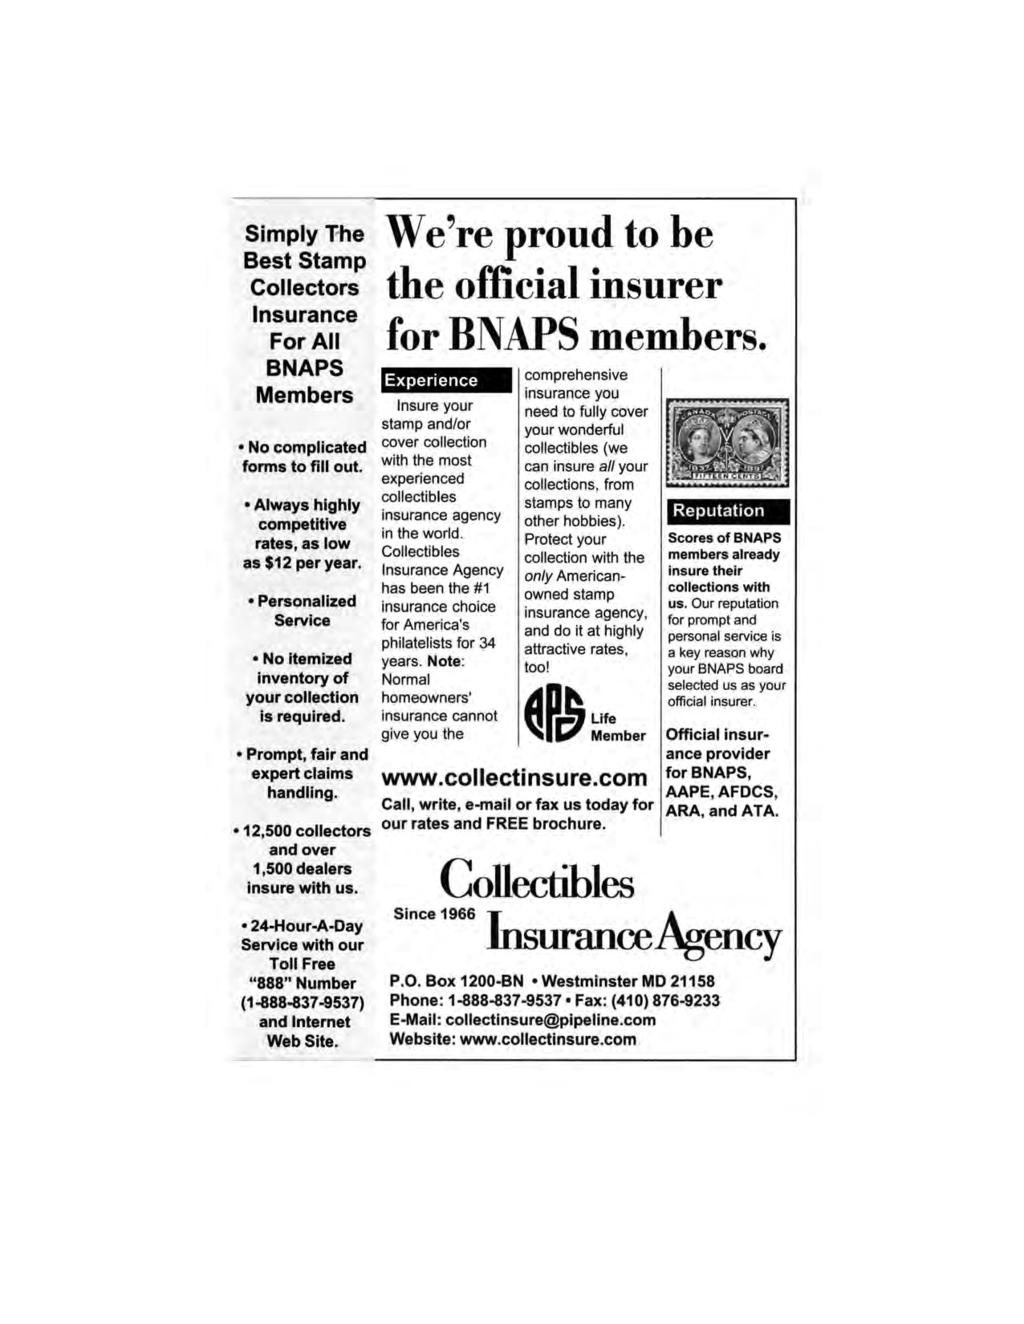 Simply "Fhe Best Stamp Collectors Insurance For All BNAPS Members We're proud to be the official insurer for BNAPS members.